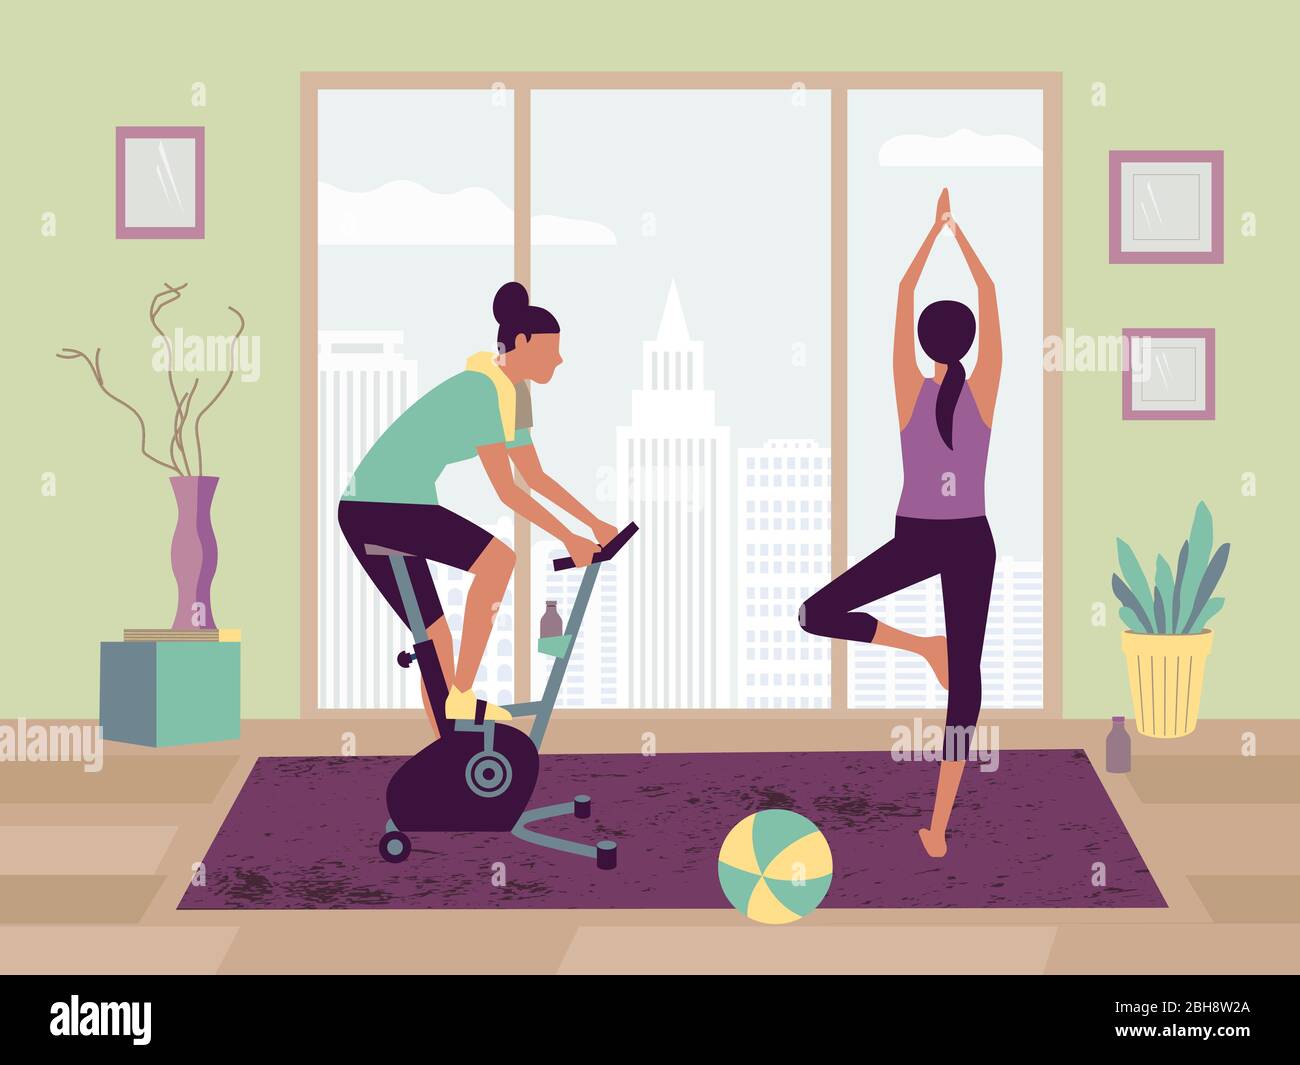 Females sport activity at home flat vector. Stay home yoga practice bicycle riding cartoon. Breathing exercise workout background. Healthy lifestyle Stock Vector